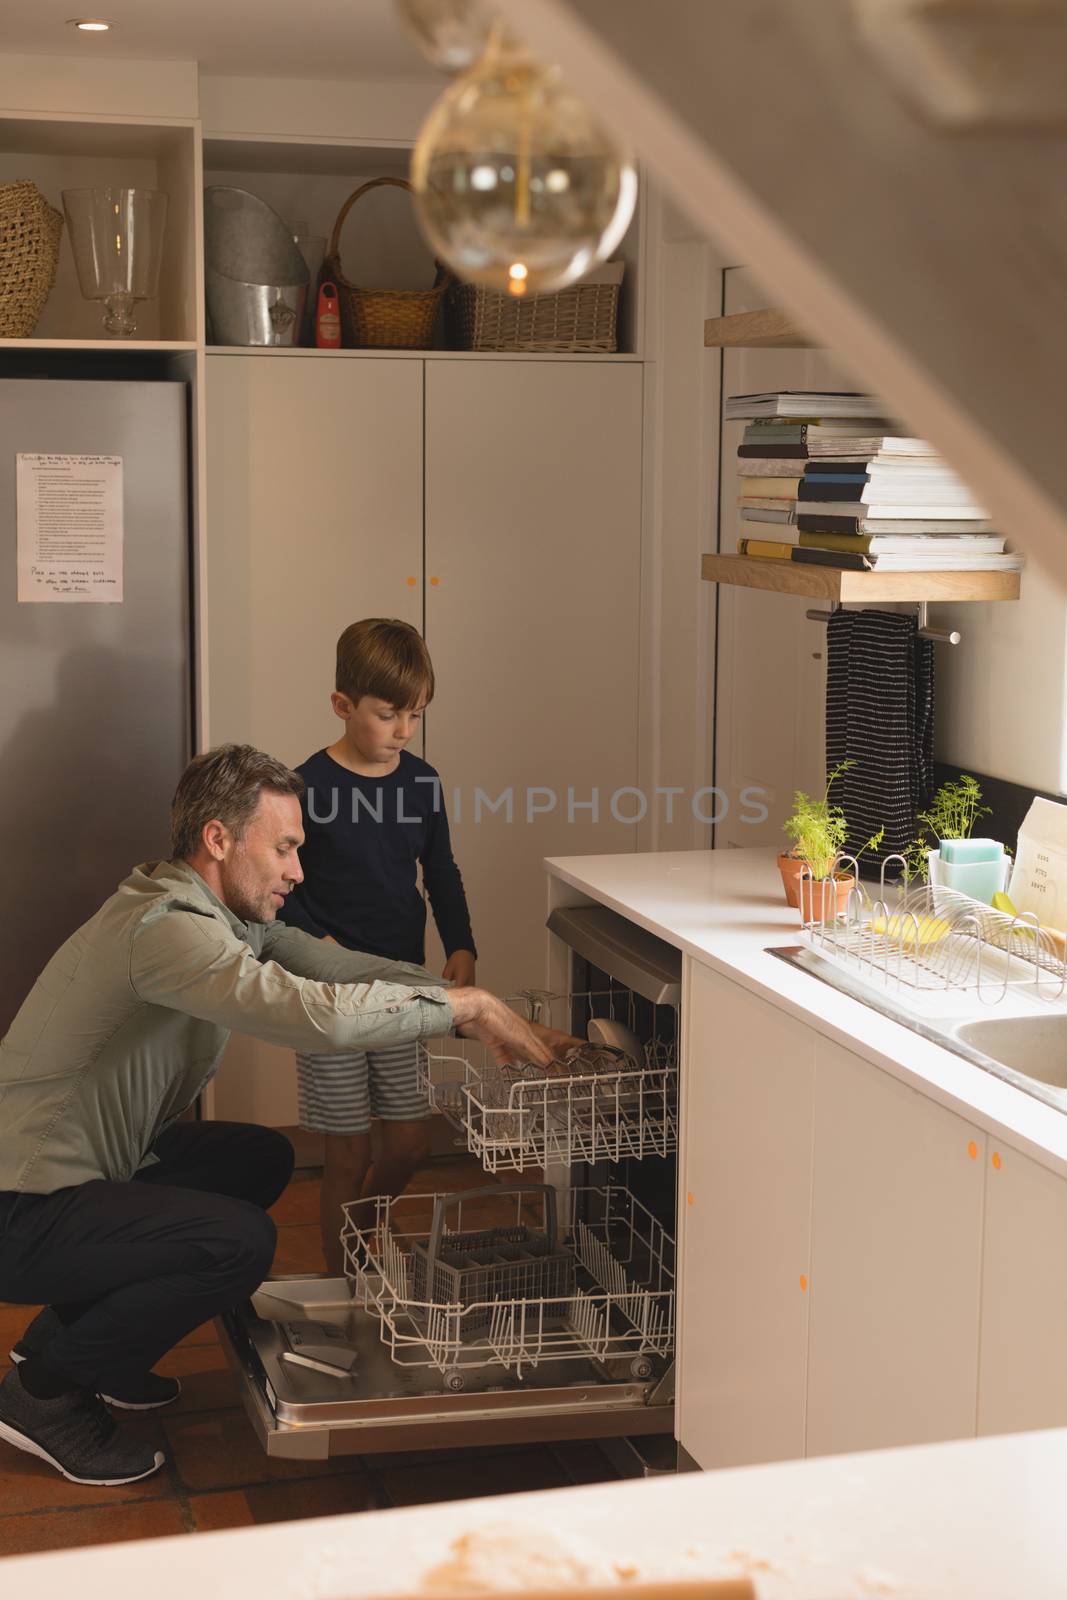 Father and son putting utensils in dishwasher by Wavebreakmedia